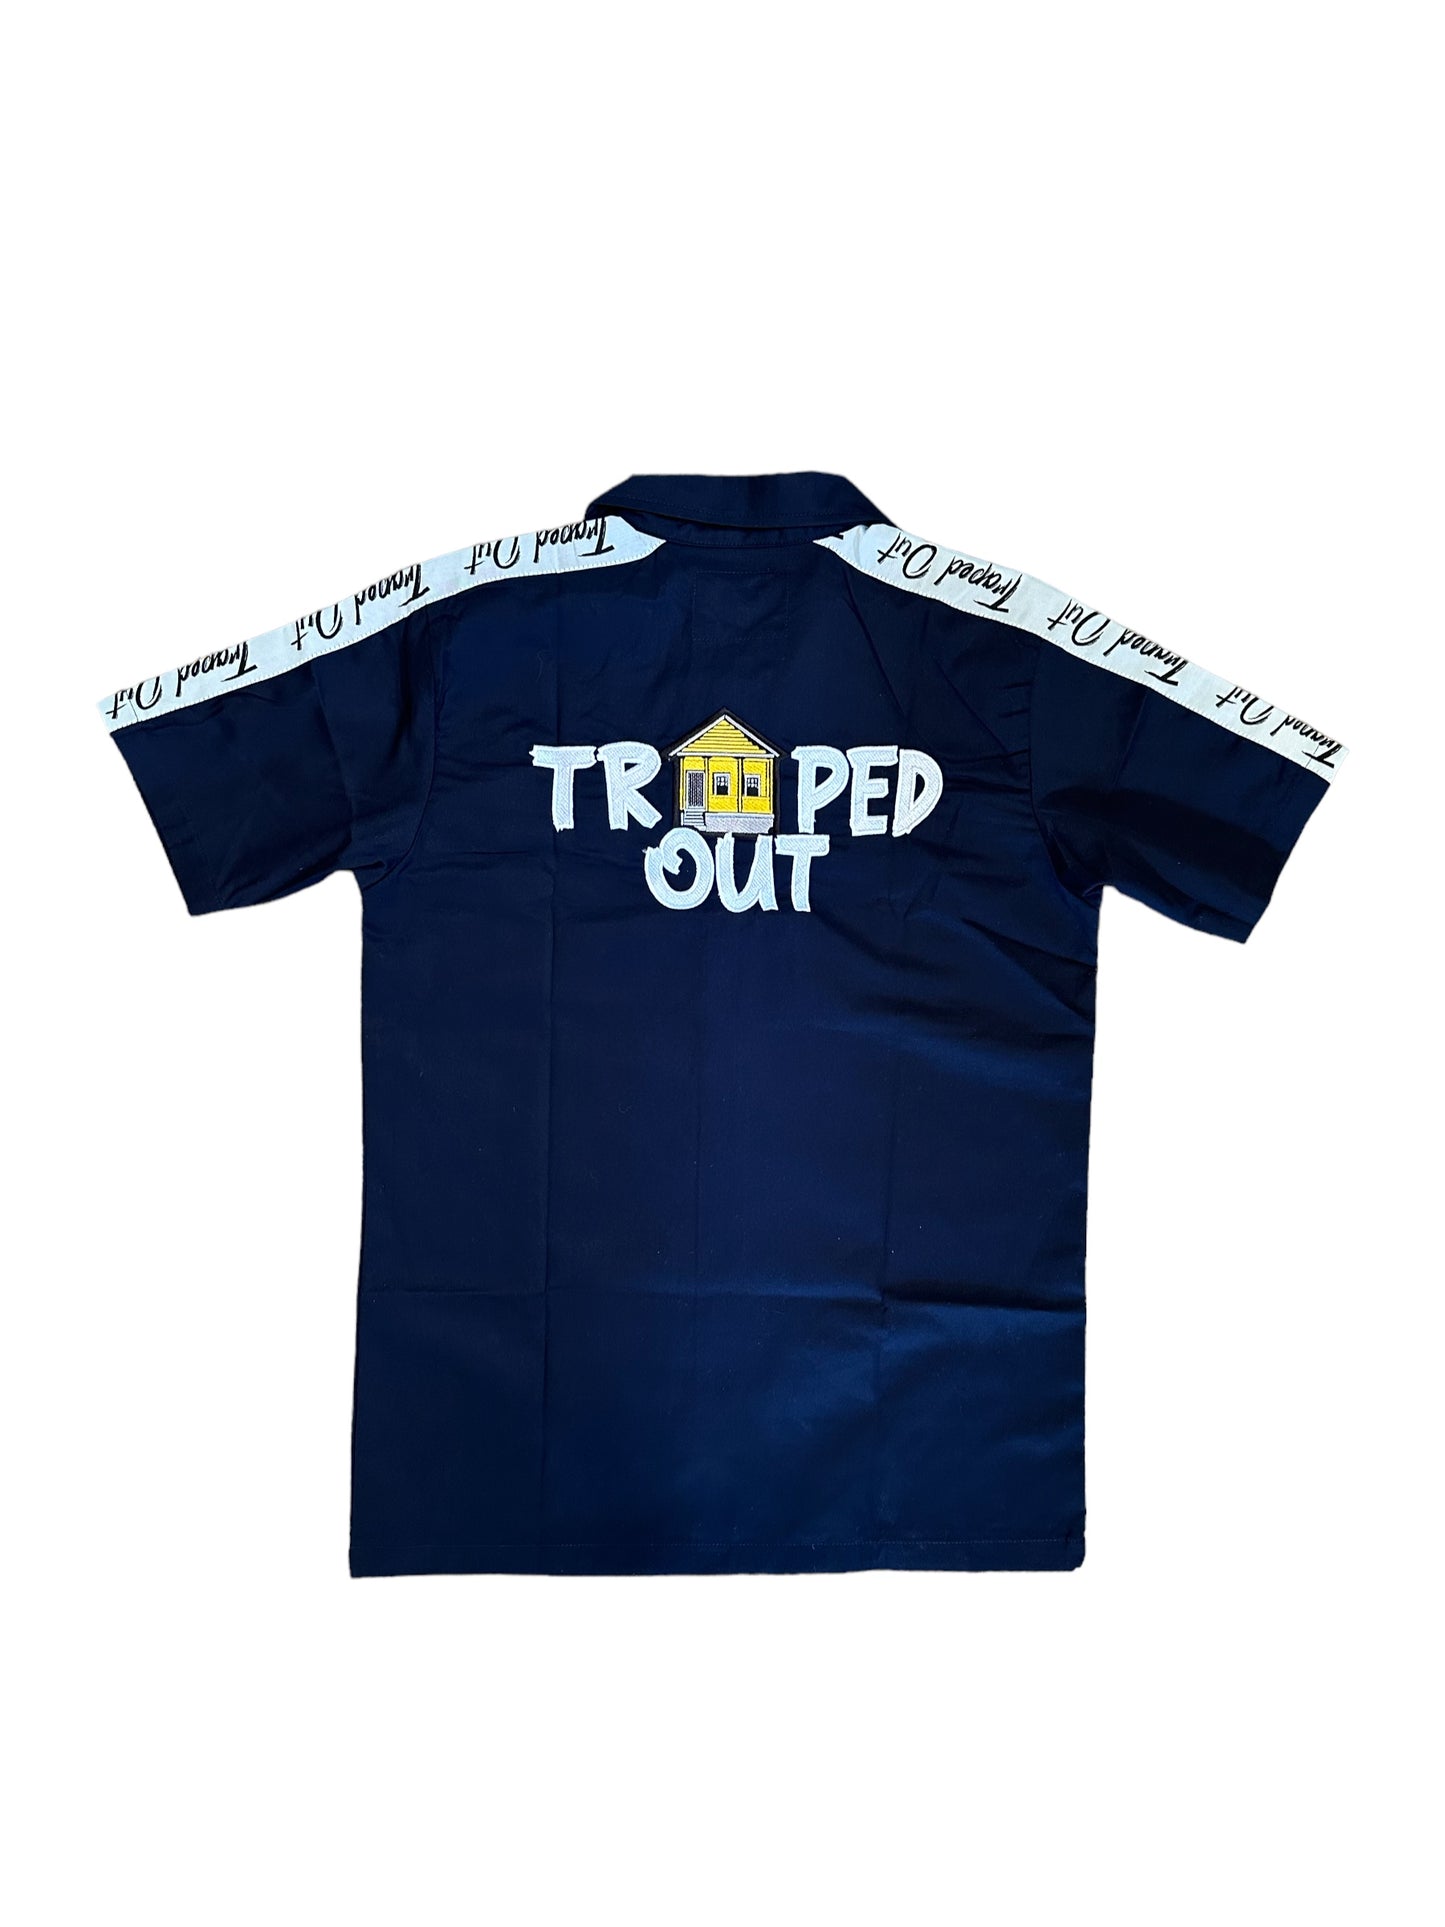 Navy Blue Trapped Out Dickie Shirt